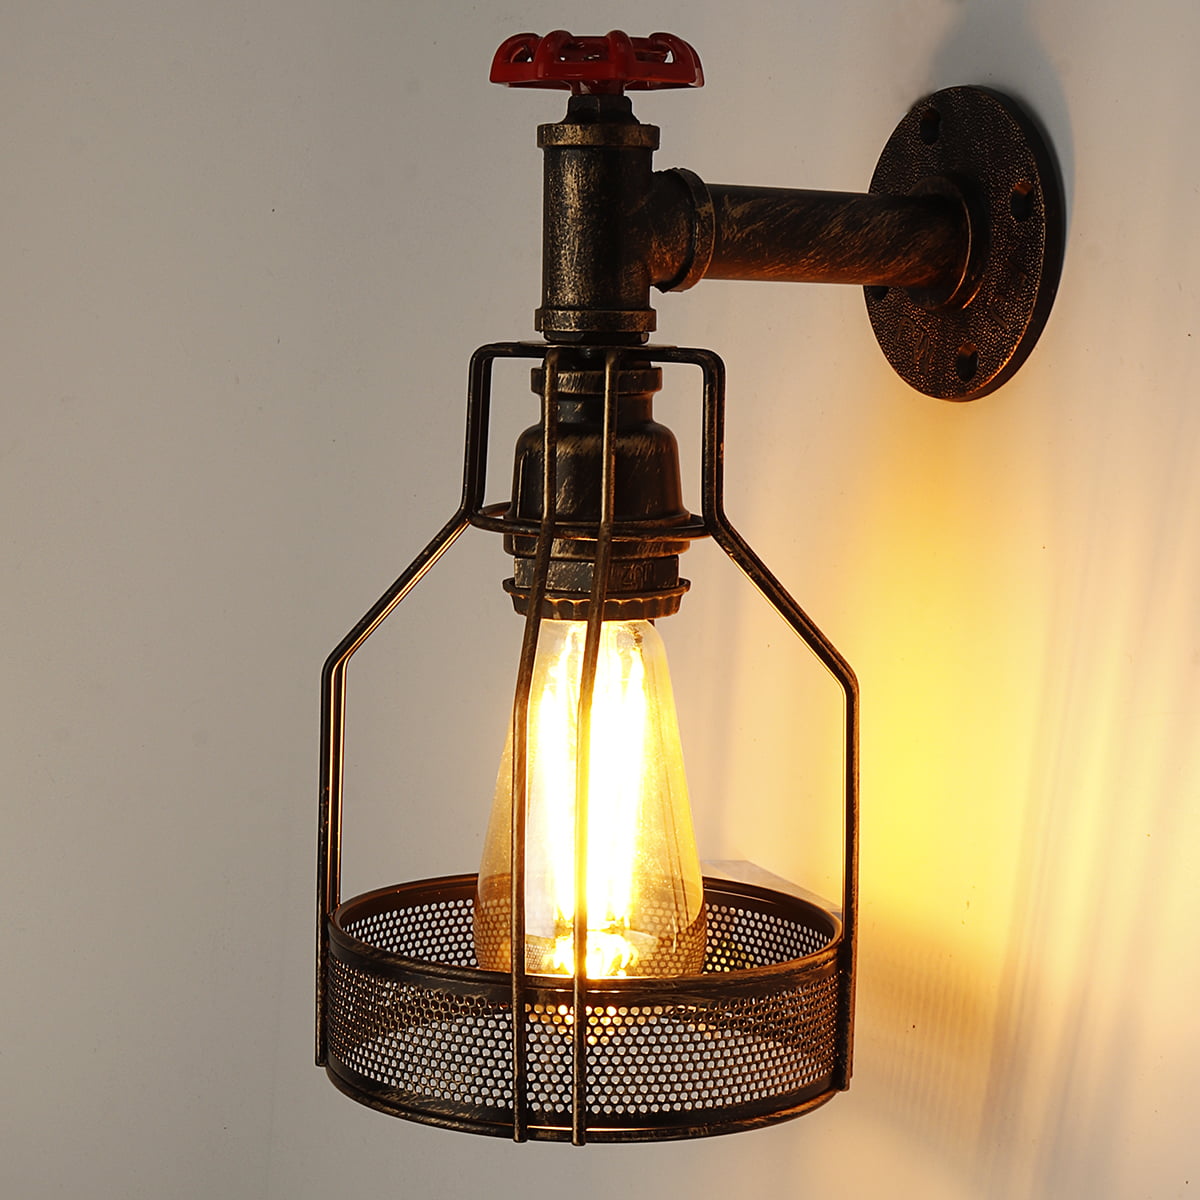 E26/E27 Industrial Iron Water Tube Steampunk Wall Lamp Sconce Light Fixture 